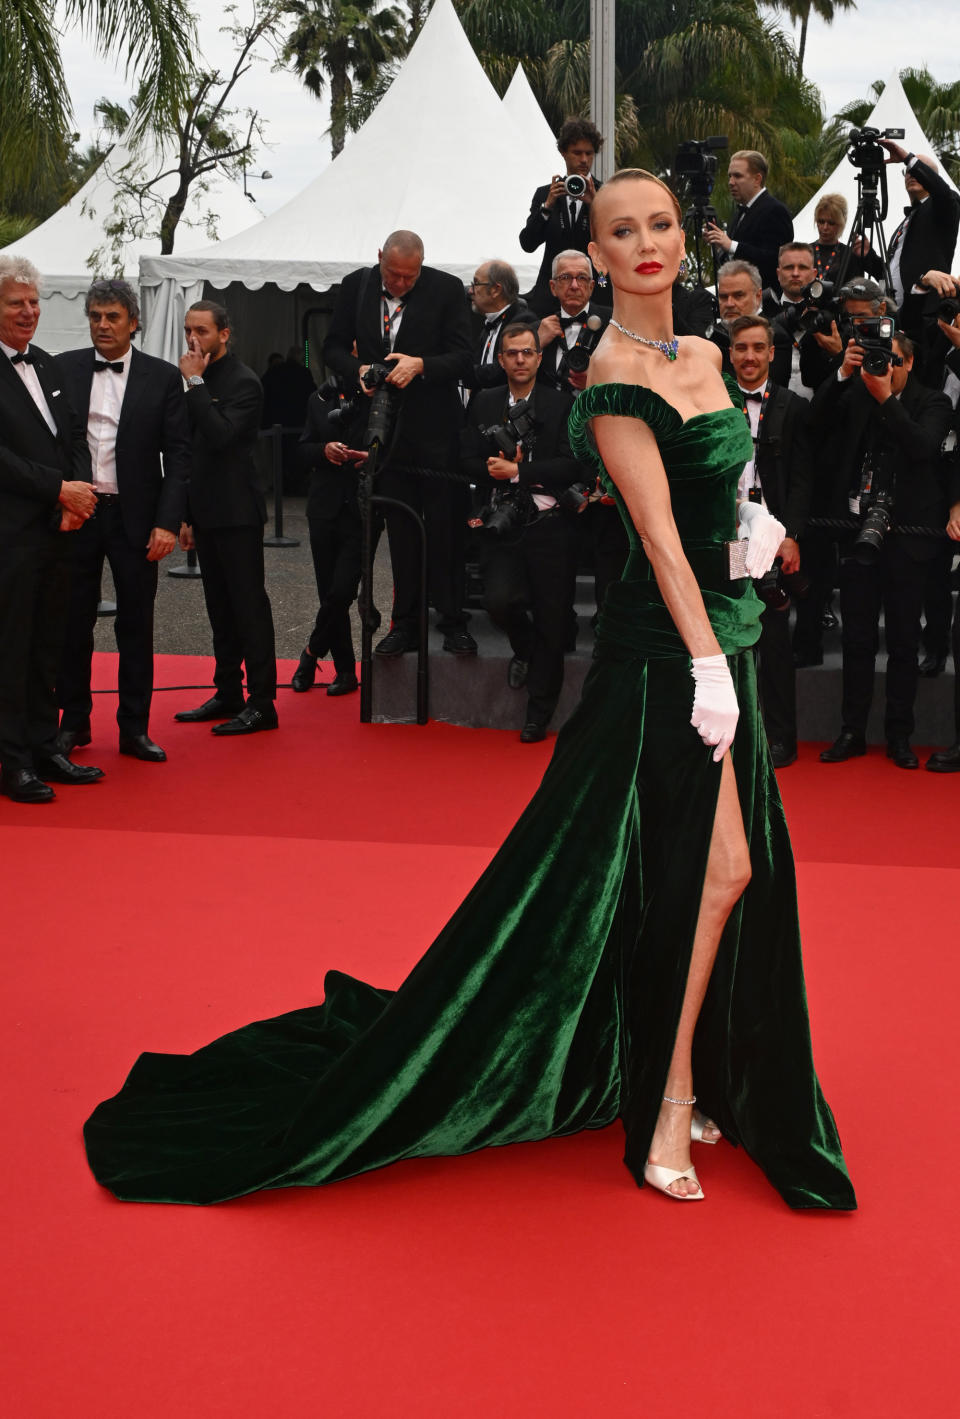 77th Annual Cannes Film Festival – Opening Night Ceremony and “The Second Act” Premiere